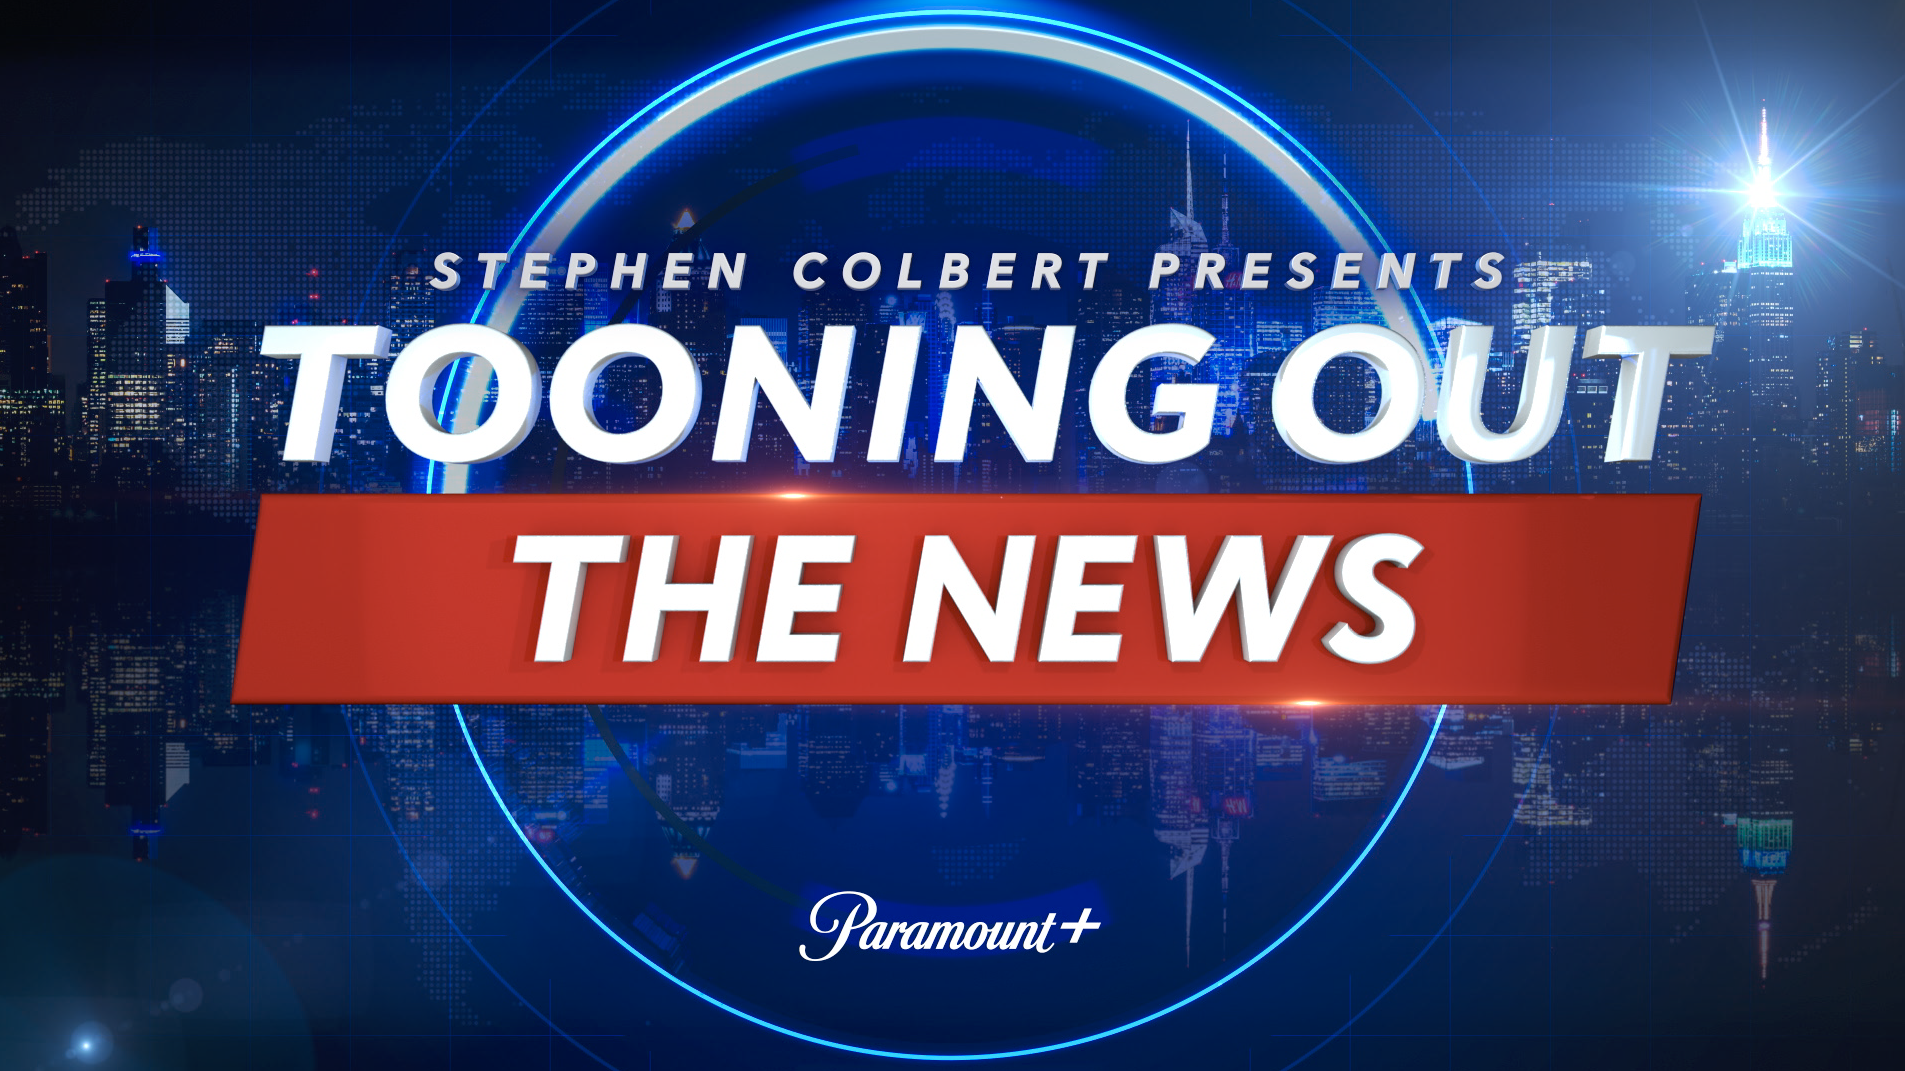 COMEDY:  Stephen Colbert Presents Tooning Out the News - Season 2 Show Opens